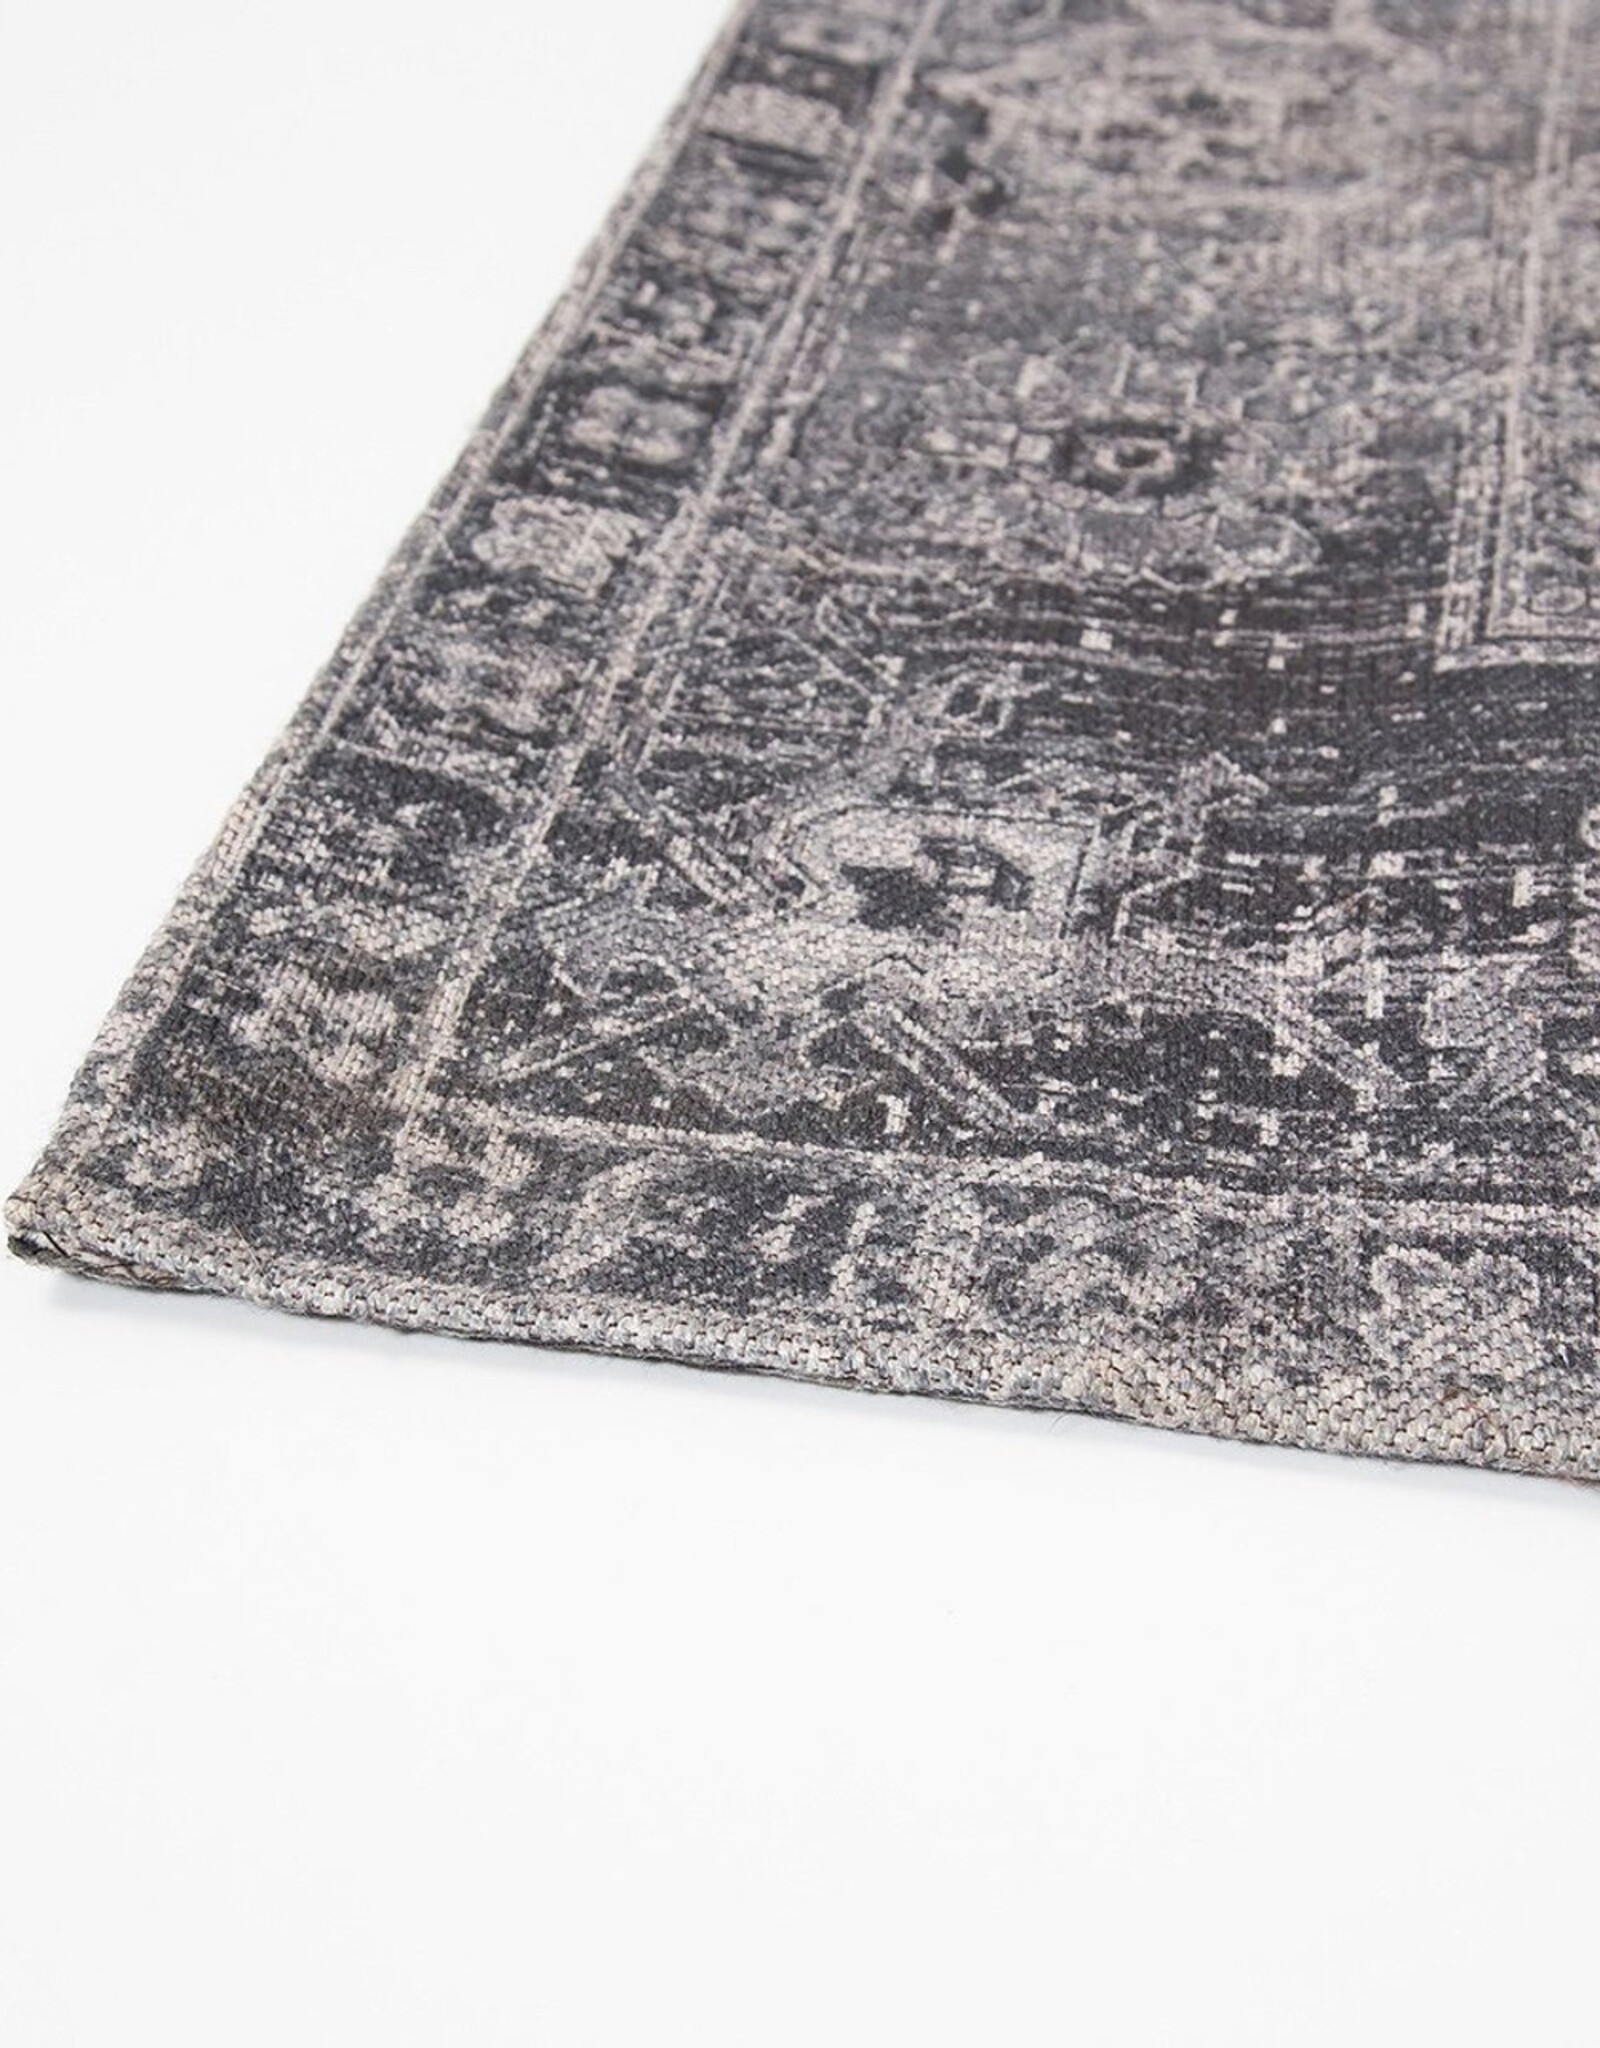 Style In Form Rugs SIF Boreal 6 X 9 Grey RRC-016